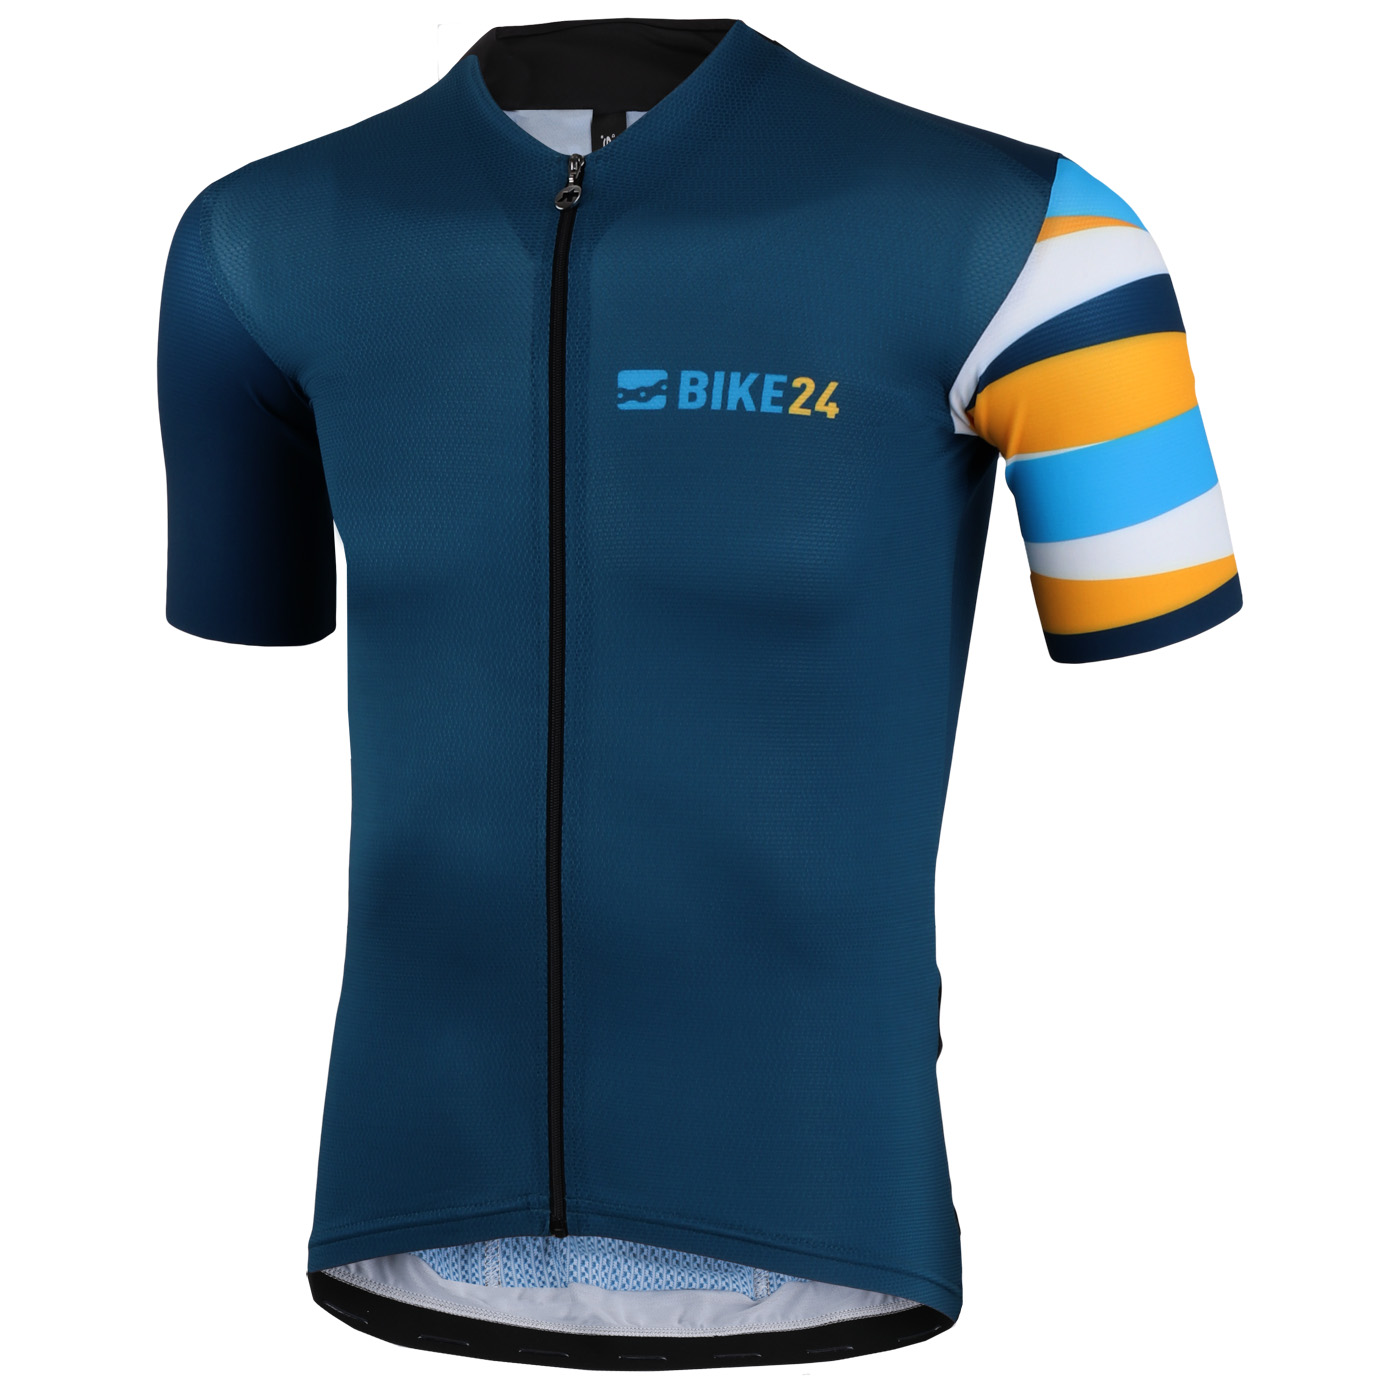 Picture of Assos x BIKE24 Edition Short Sleeve Jersey PCR.1 - blue